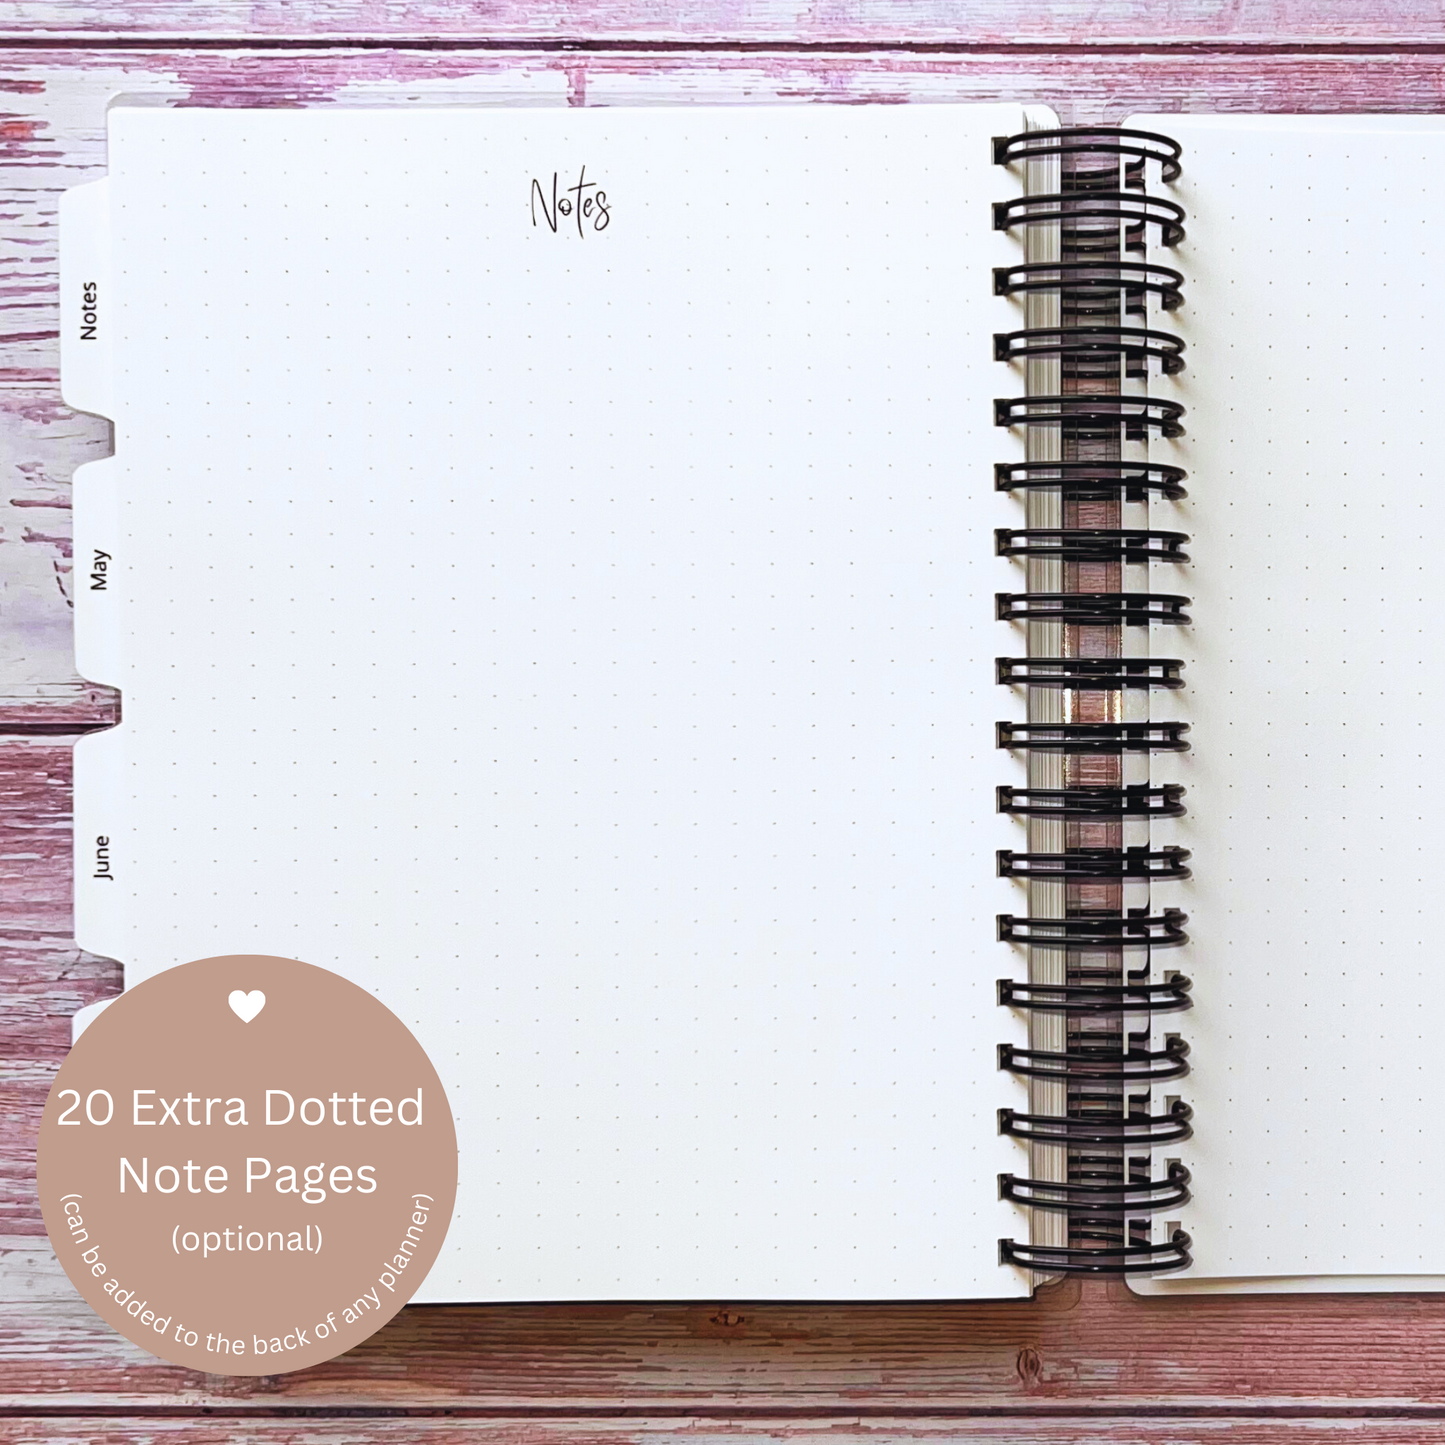 Personalized Monthly Planner - Beautiful Paths